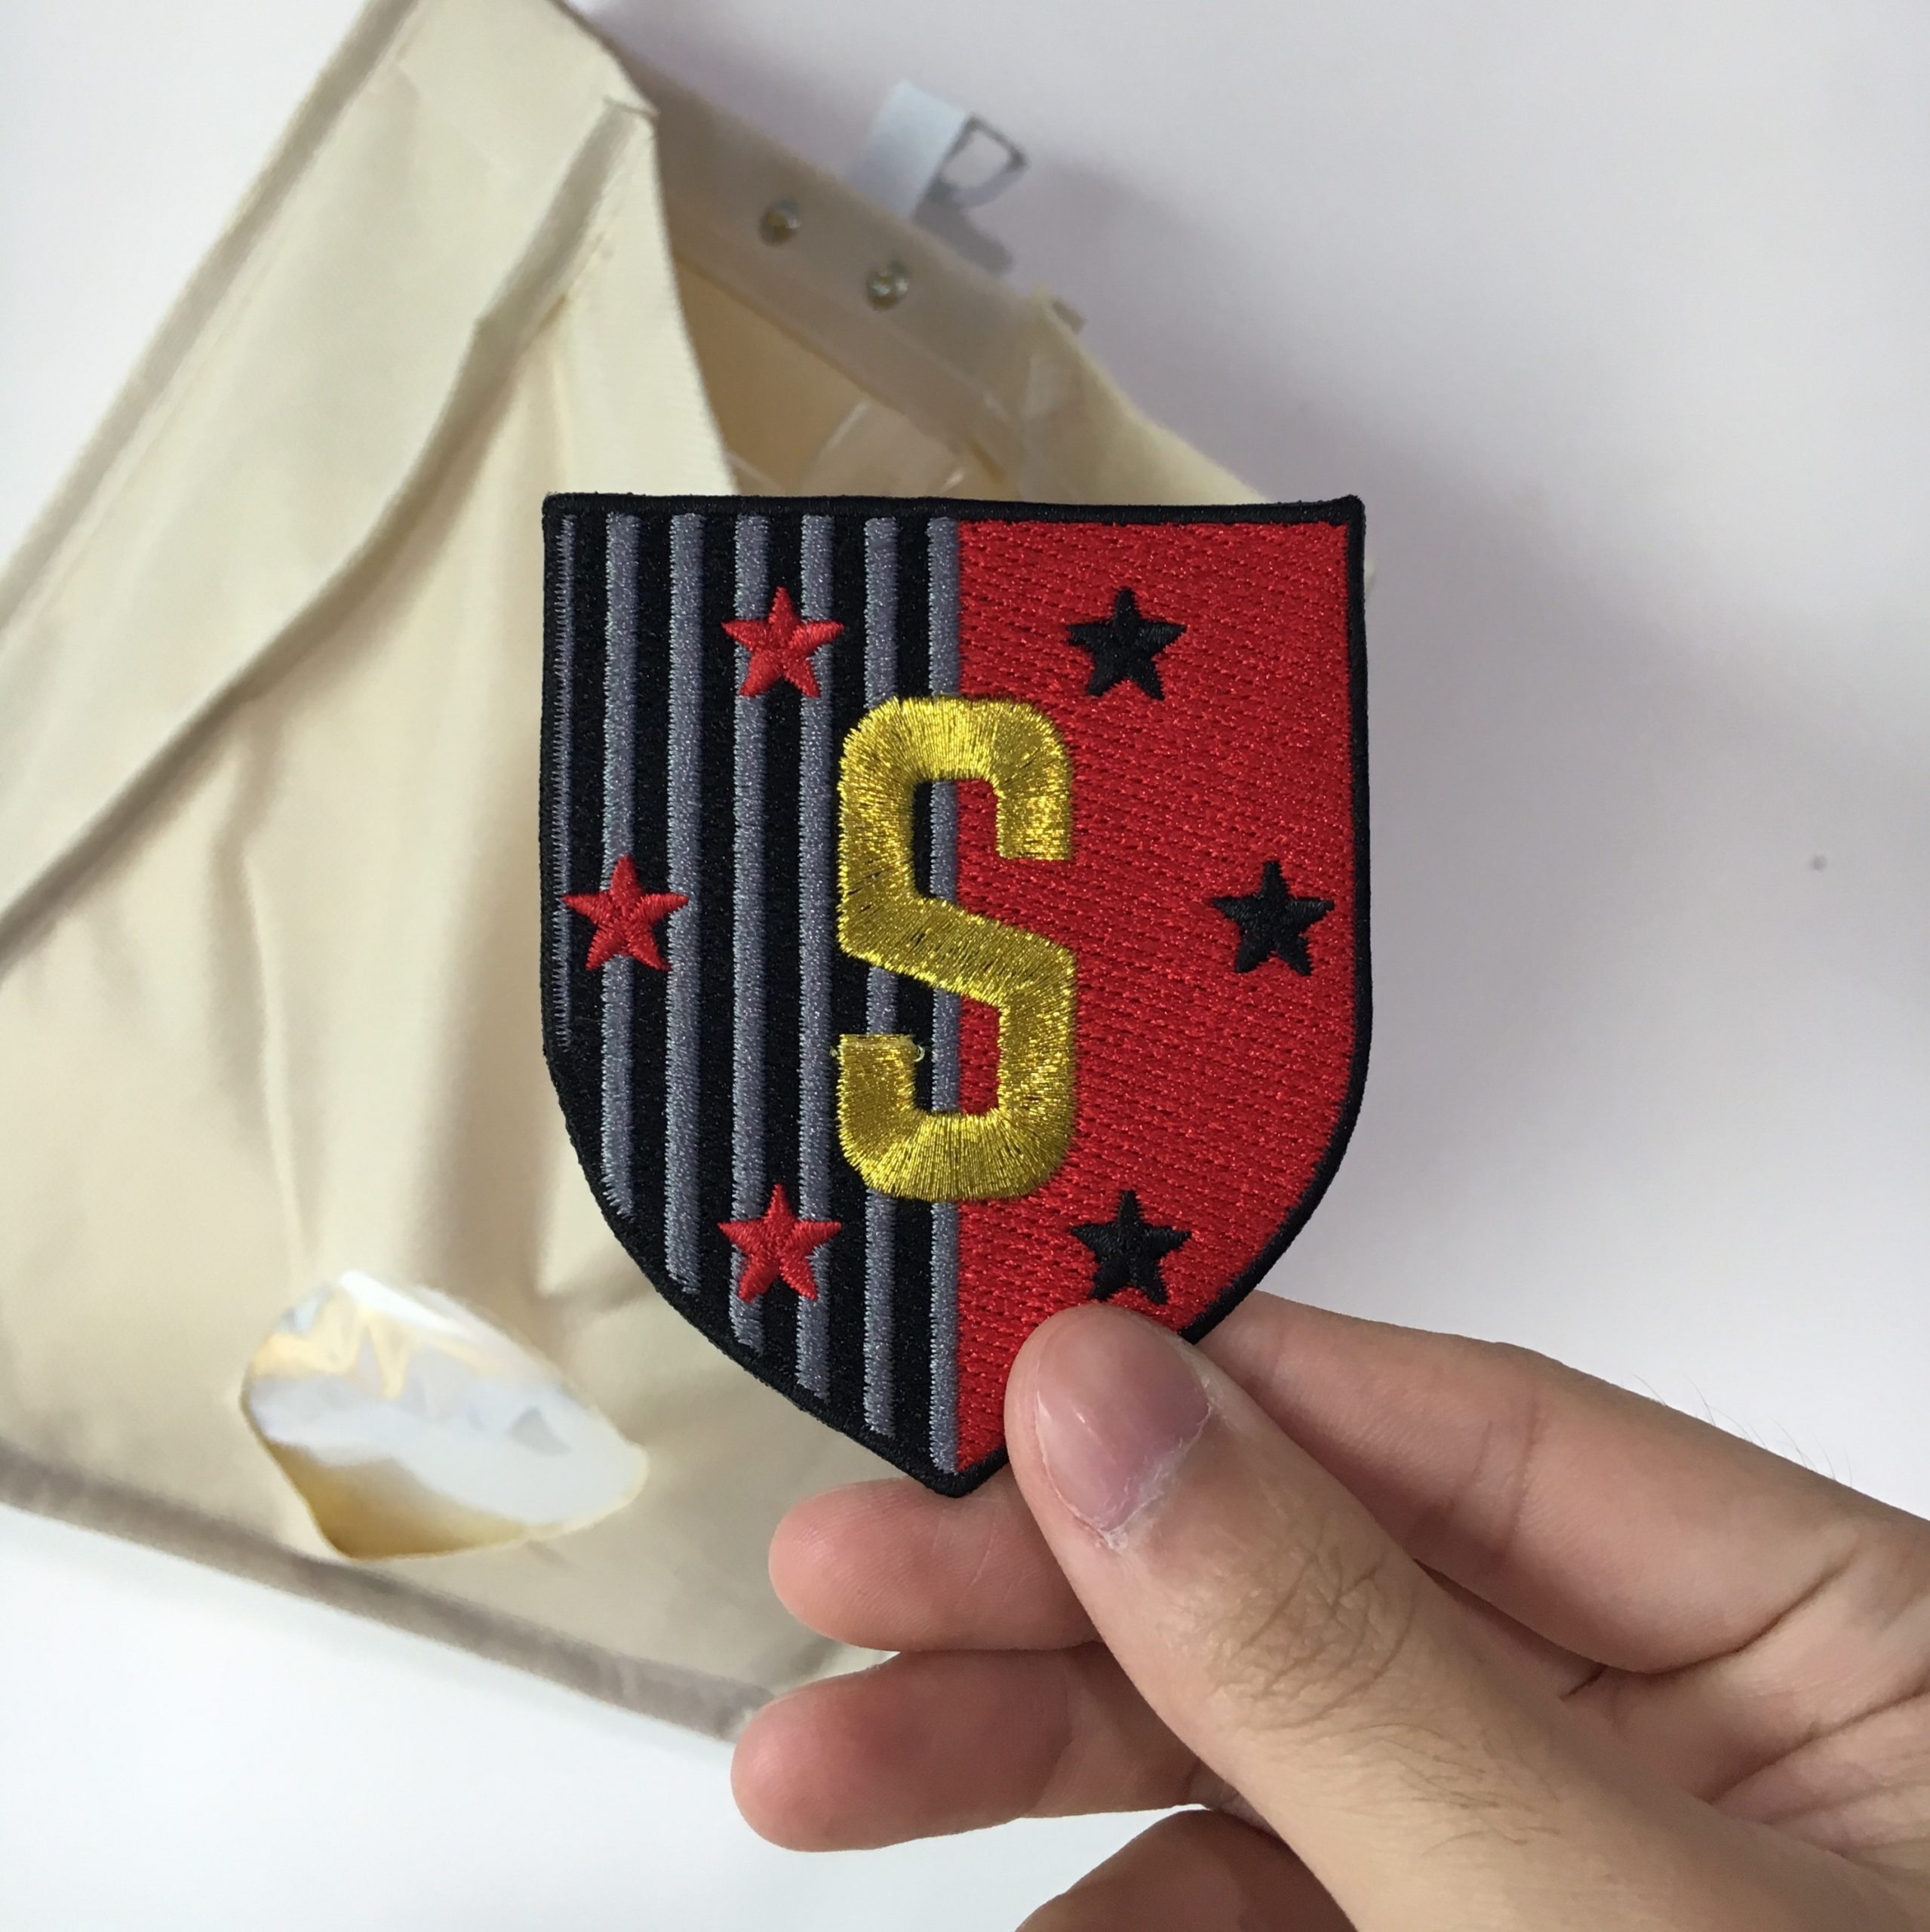 Buy Wholesale China Custom Embroidery Patches, Making Your Own